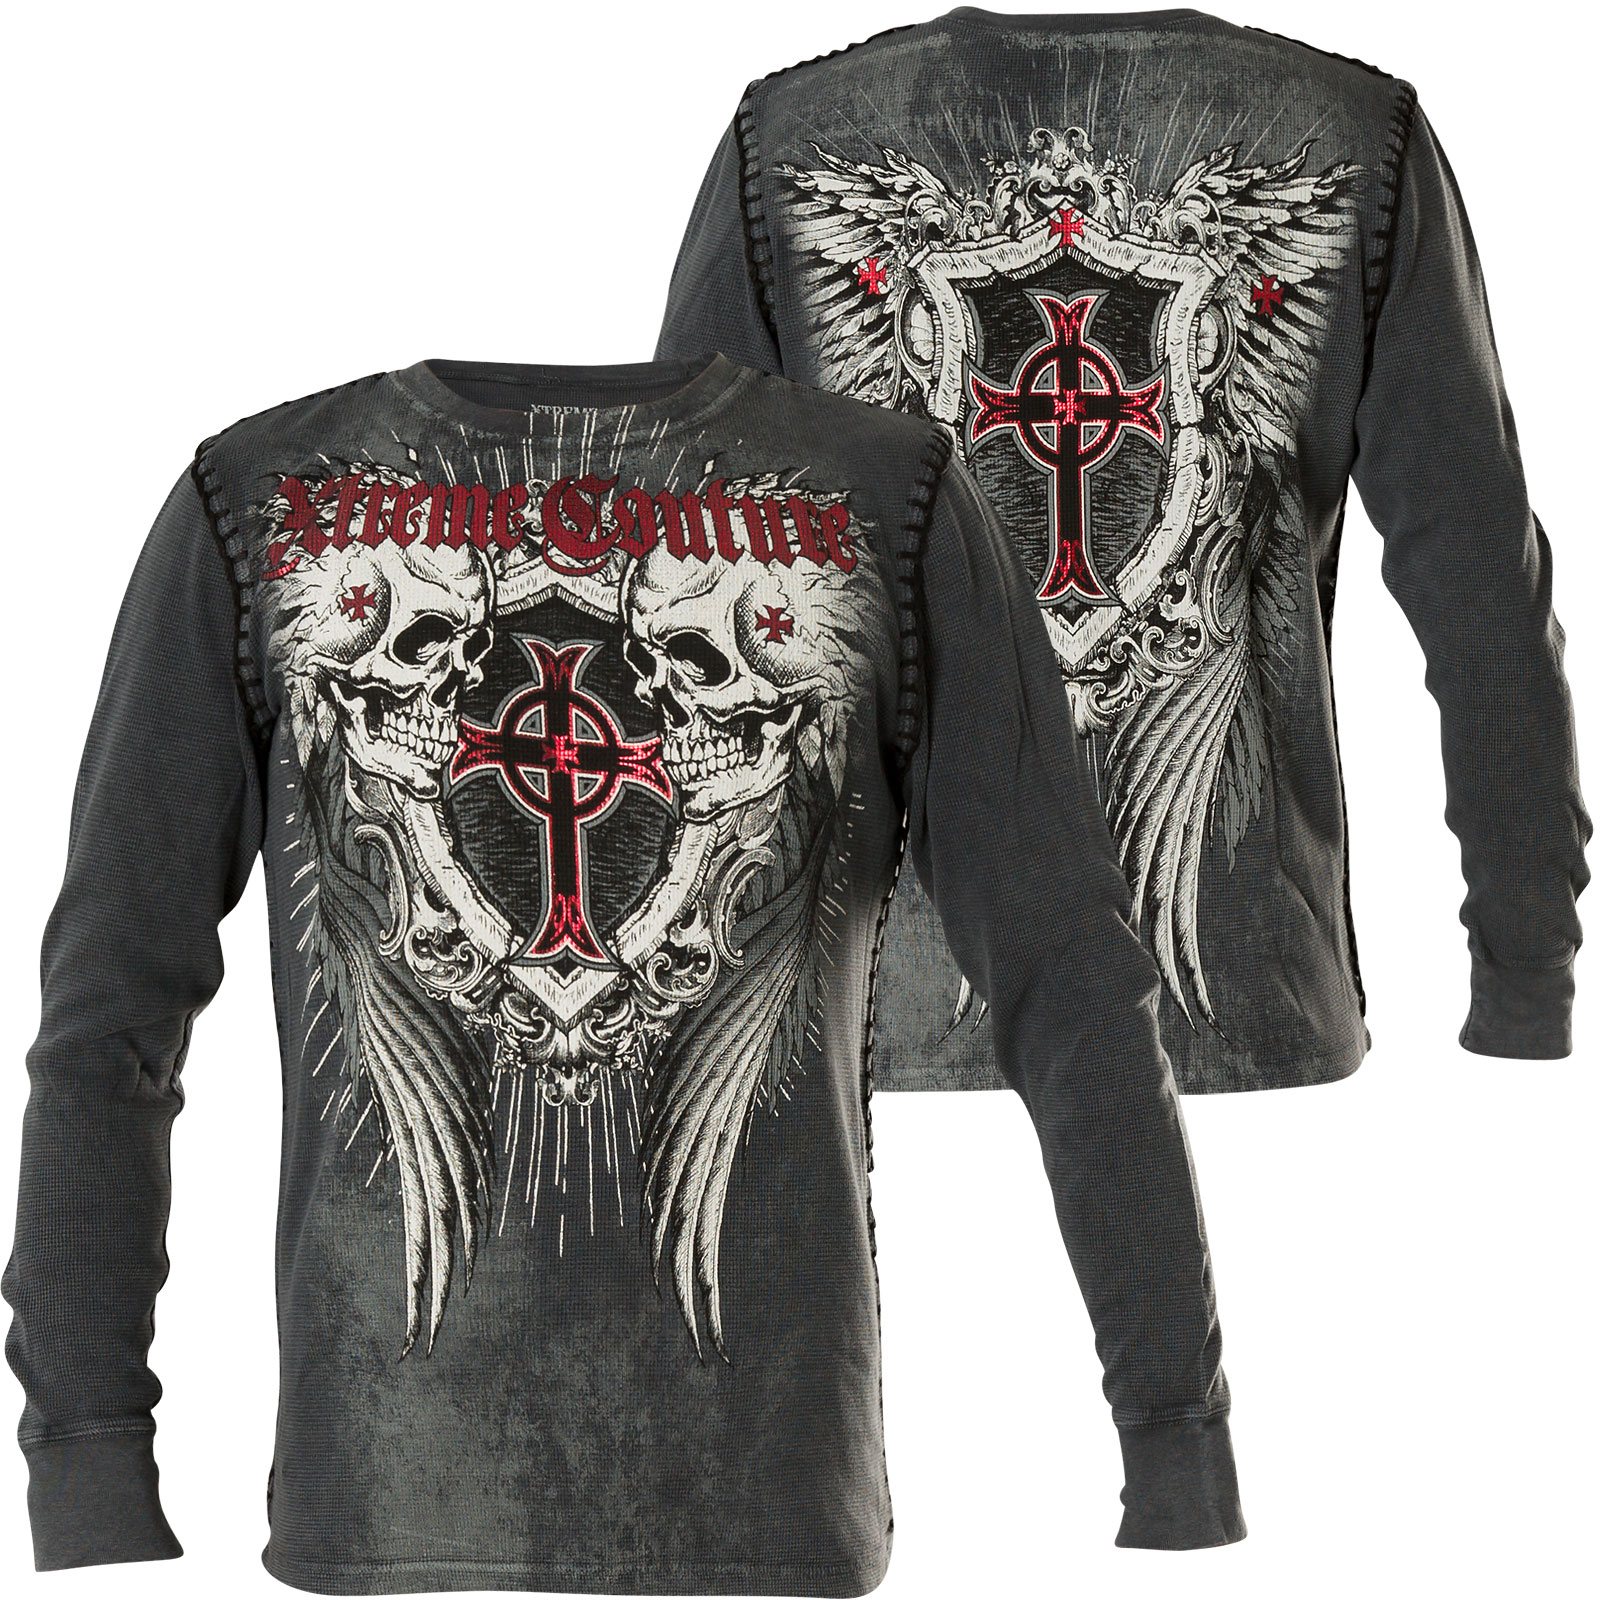 Xtreme Couture by Affliction Thermal Deaths Dance Print with skulls and ...